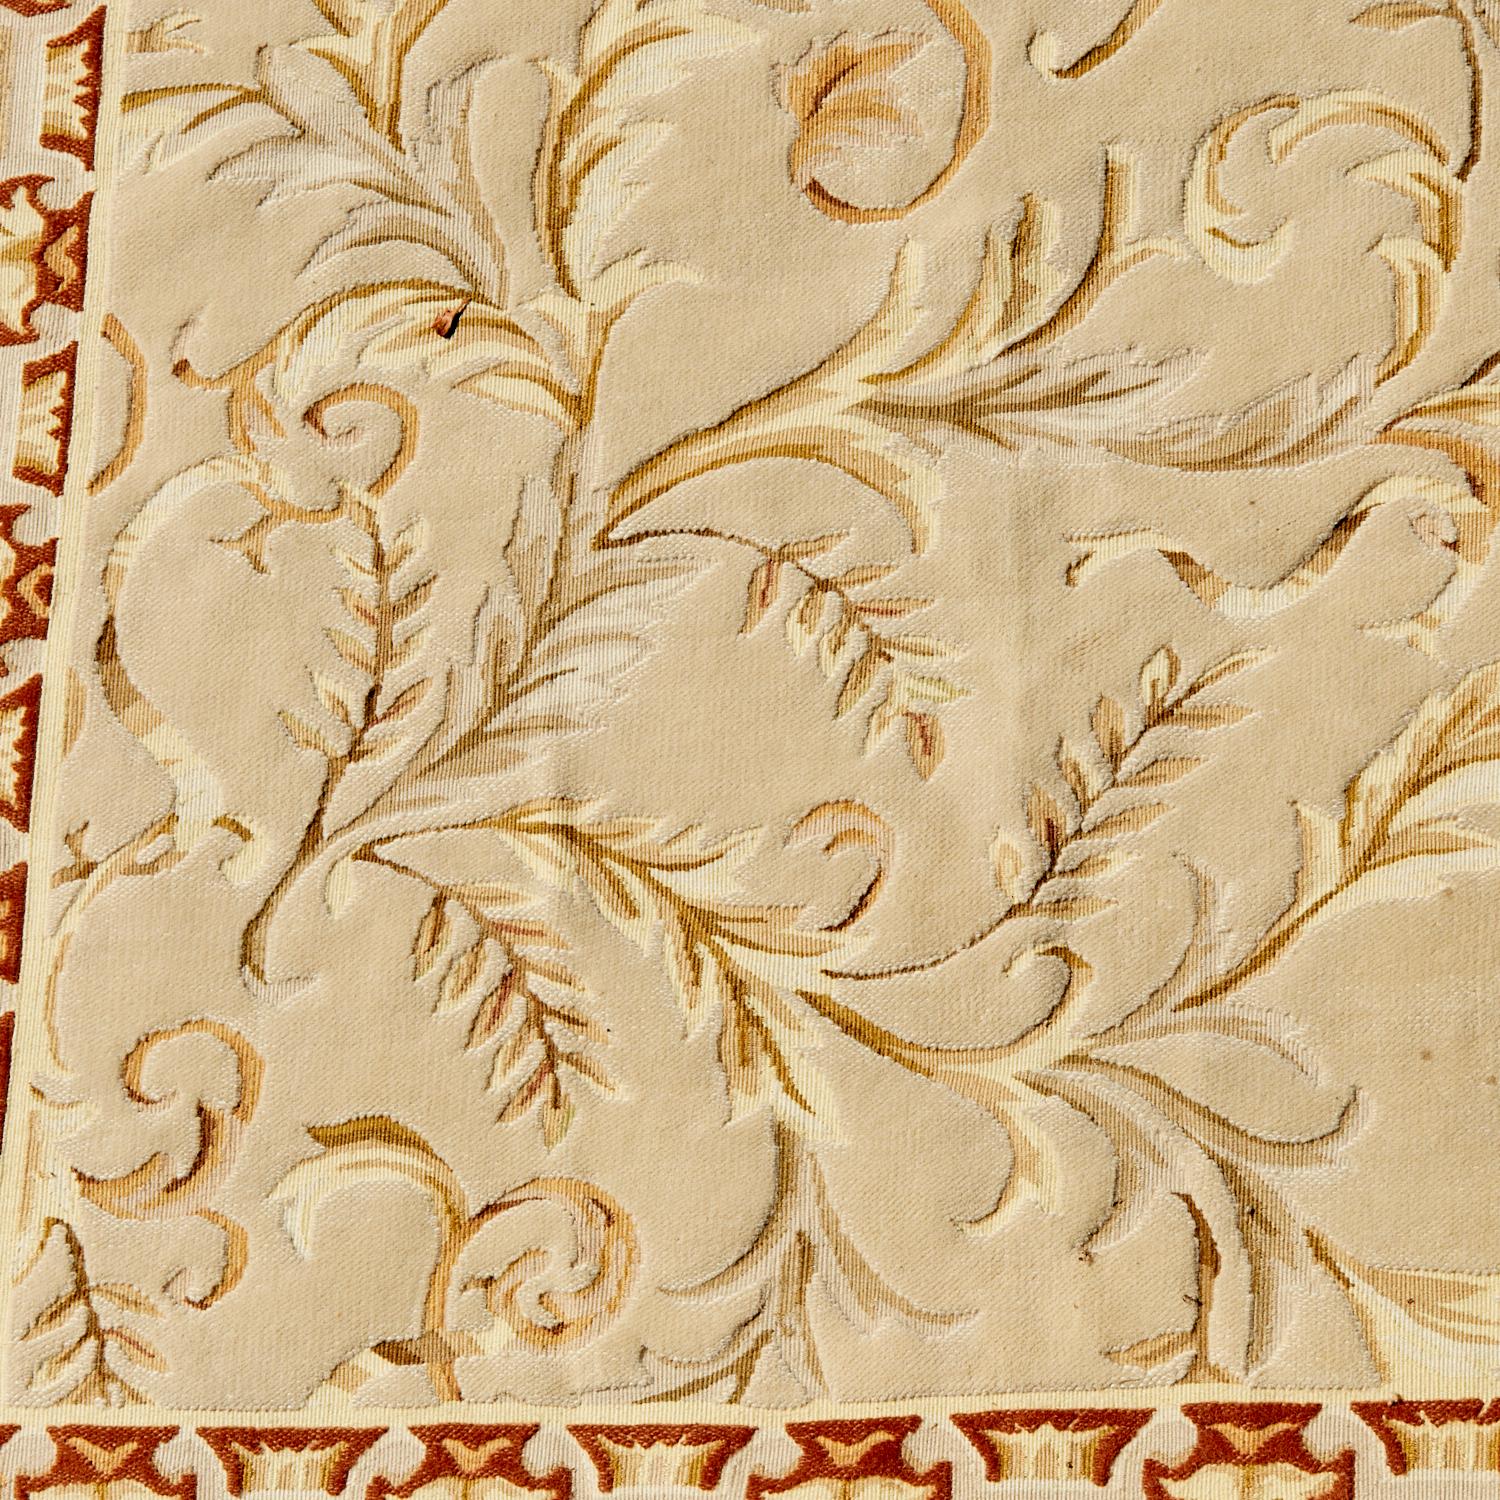 21st C. French Savonnerie style wool carpet. The design is a foliate vine pattern in gold, light green and brown tones on a cream ground. The border has a rust ground with a geometric pattern of alternating stylized wheatsheaf and leaf design.